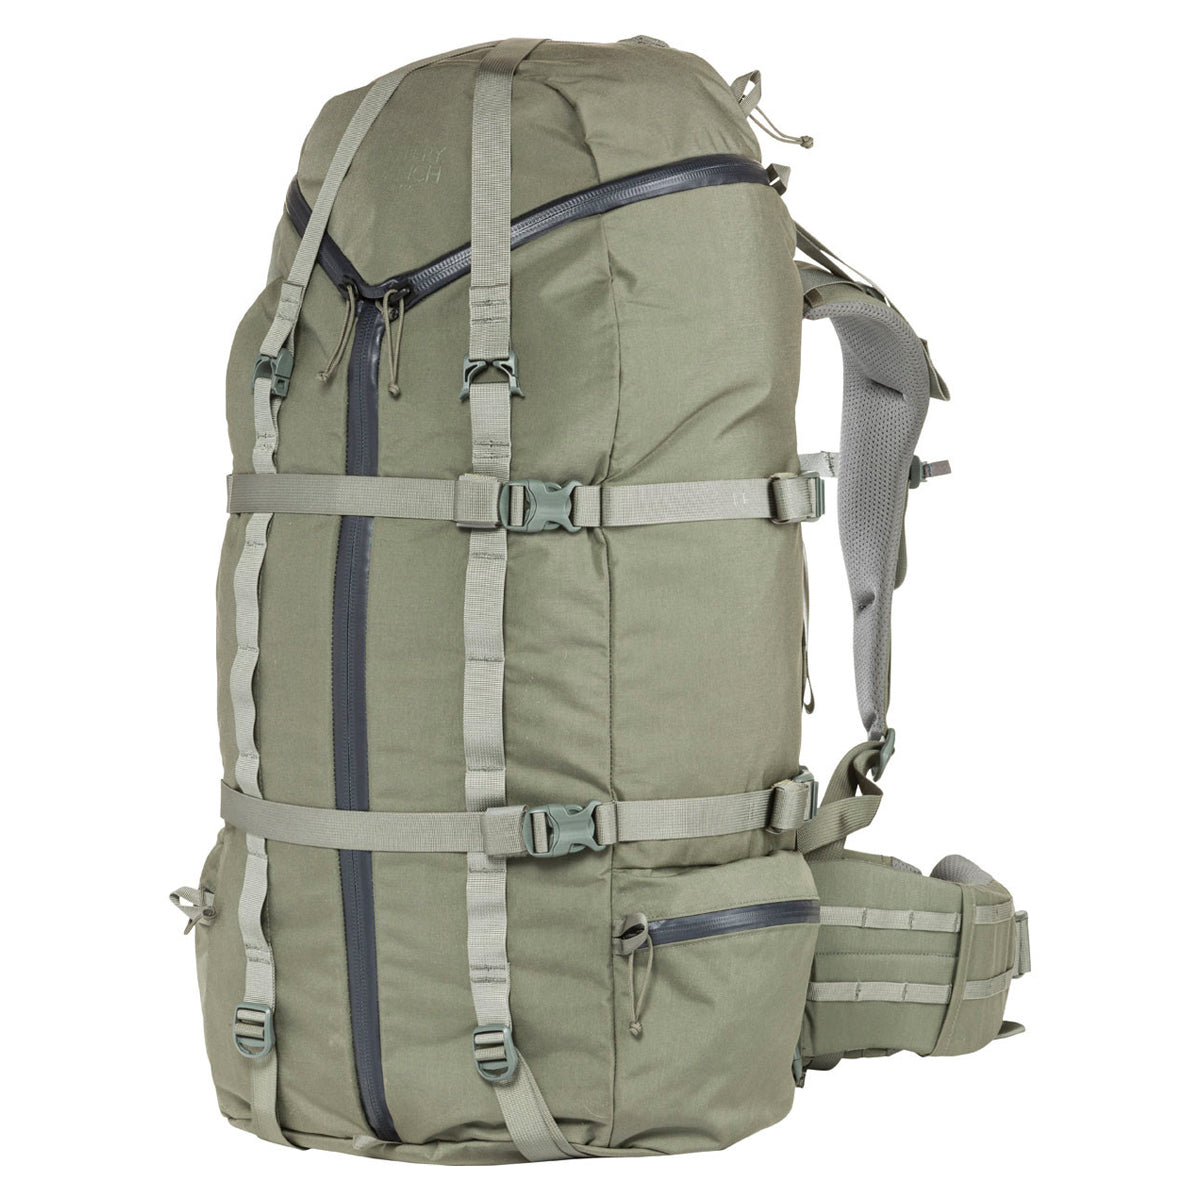 Mystery Ranch Selway 60 Backpack (2019) in Mystery Ranch Selway 60 Backpack (2019) by Mystery Ranch | Gear - goHUNT Shop by GOHUNT | Mystery Ranch - GOHUNT Shop